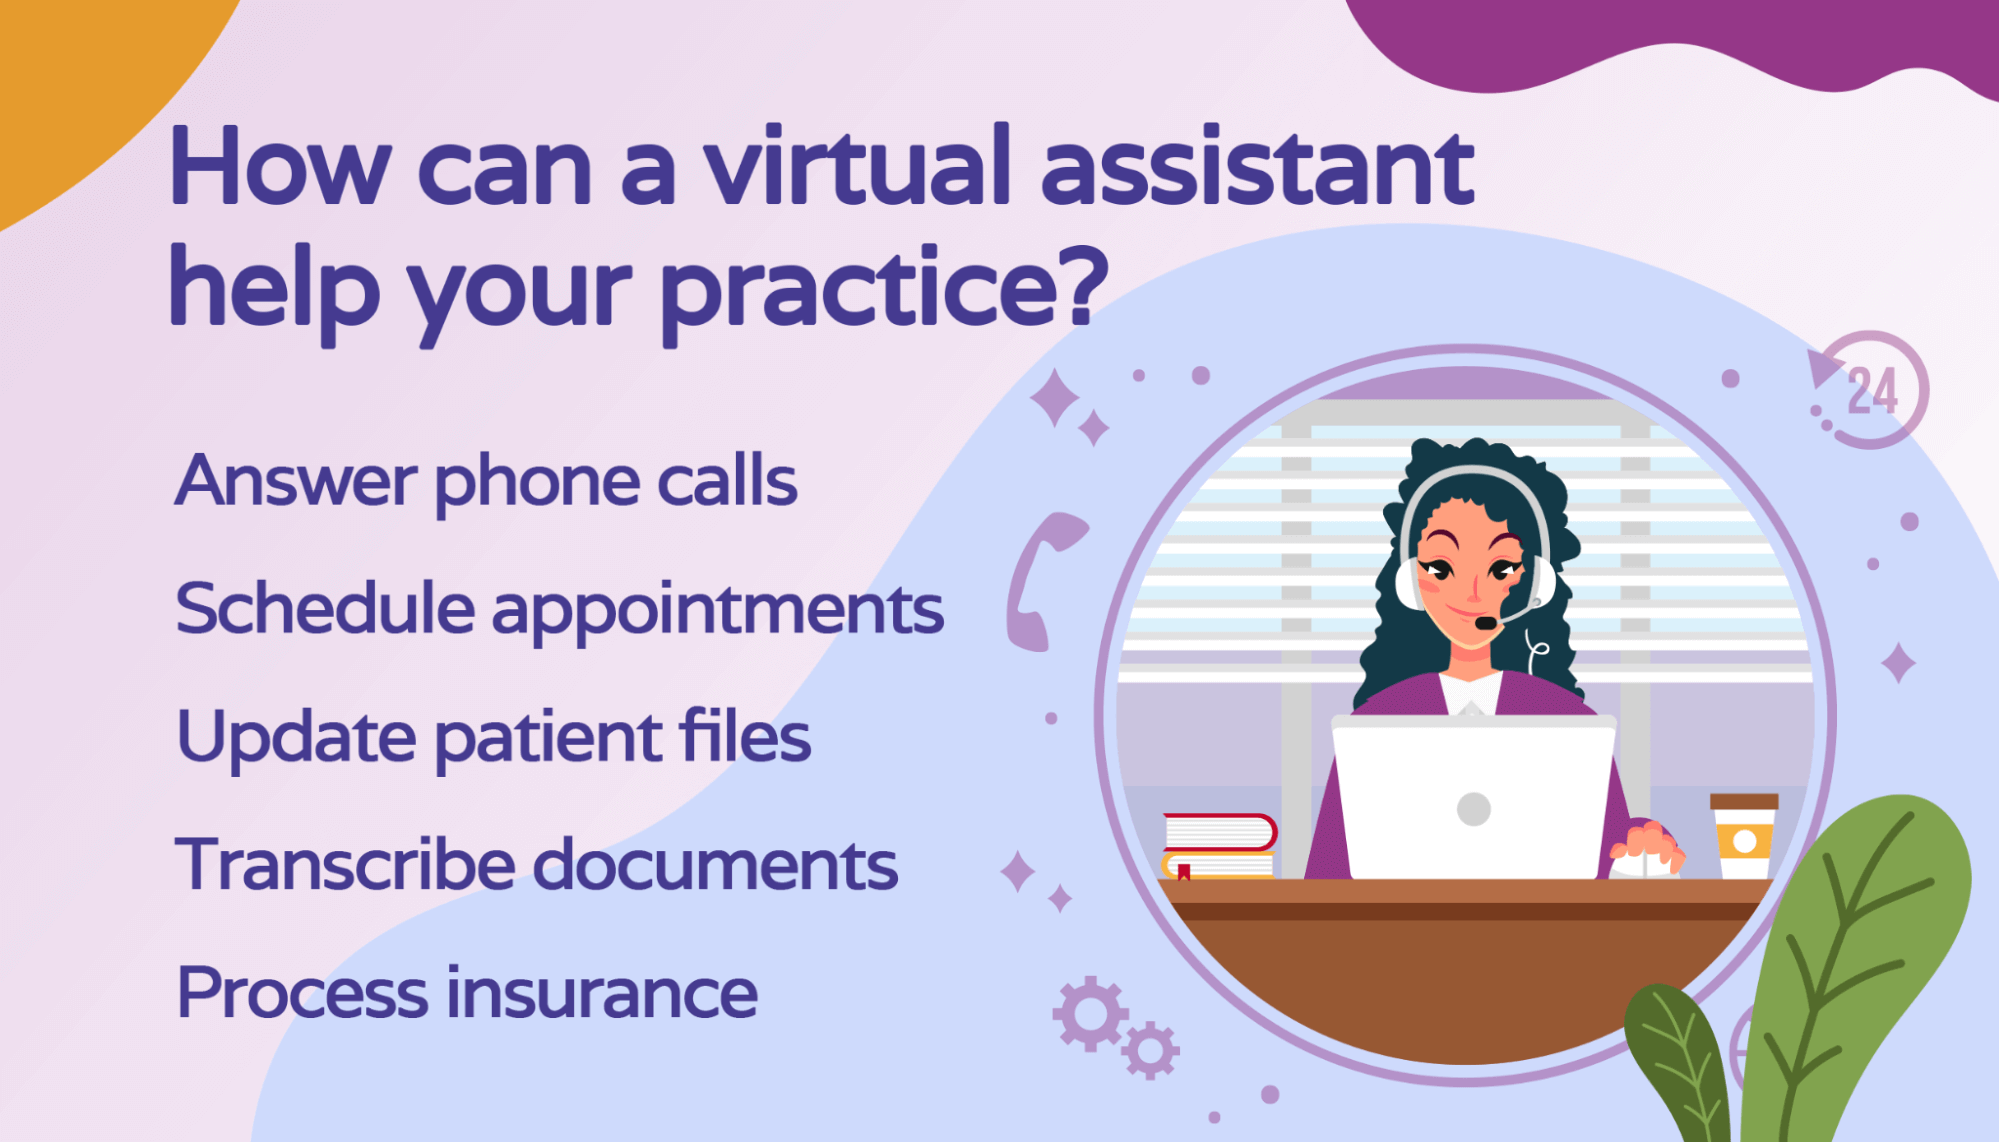 How can a virtual assistant help